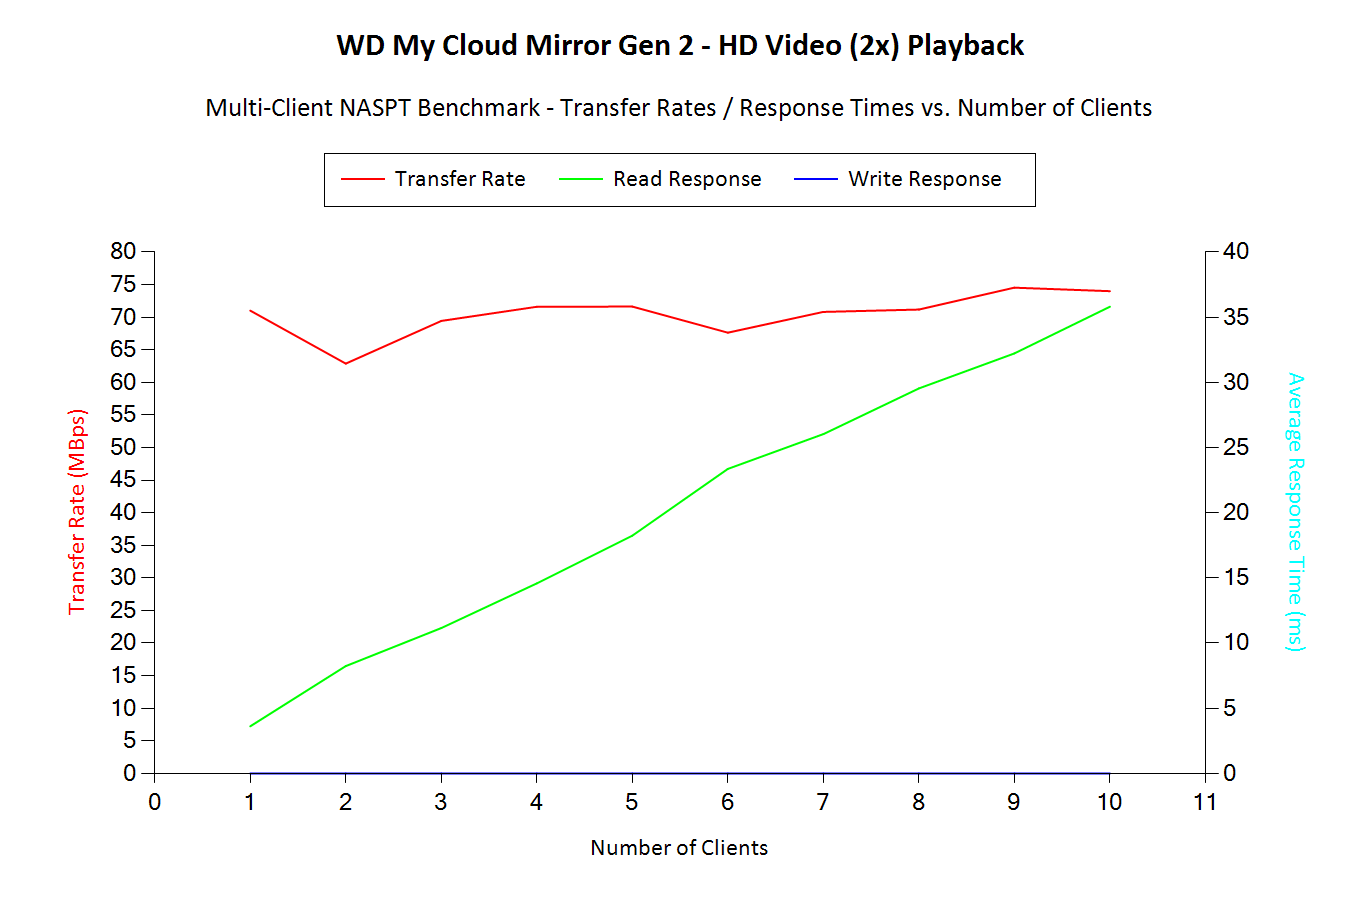 HD Video (2x) Playback - Multi-Client Benchmark